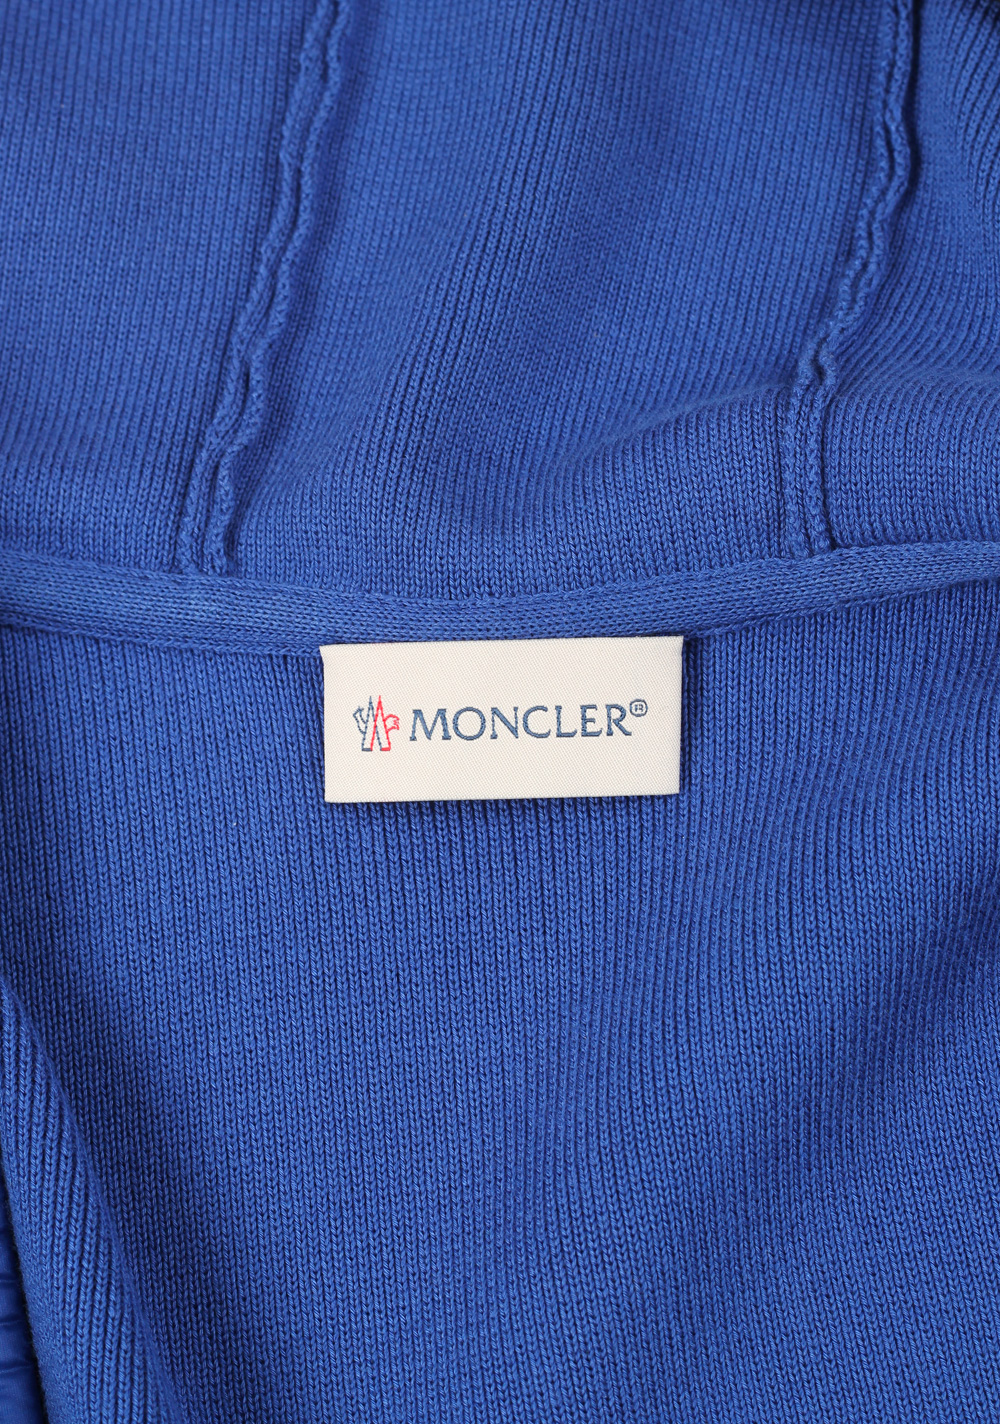 Moncler Padded Pull Sweater Size XXL / 56 / 46R U.S. | Costume Limité